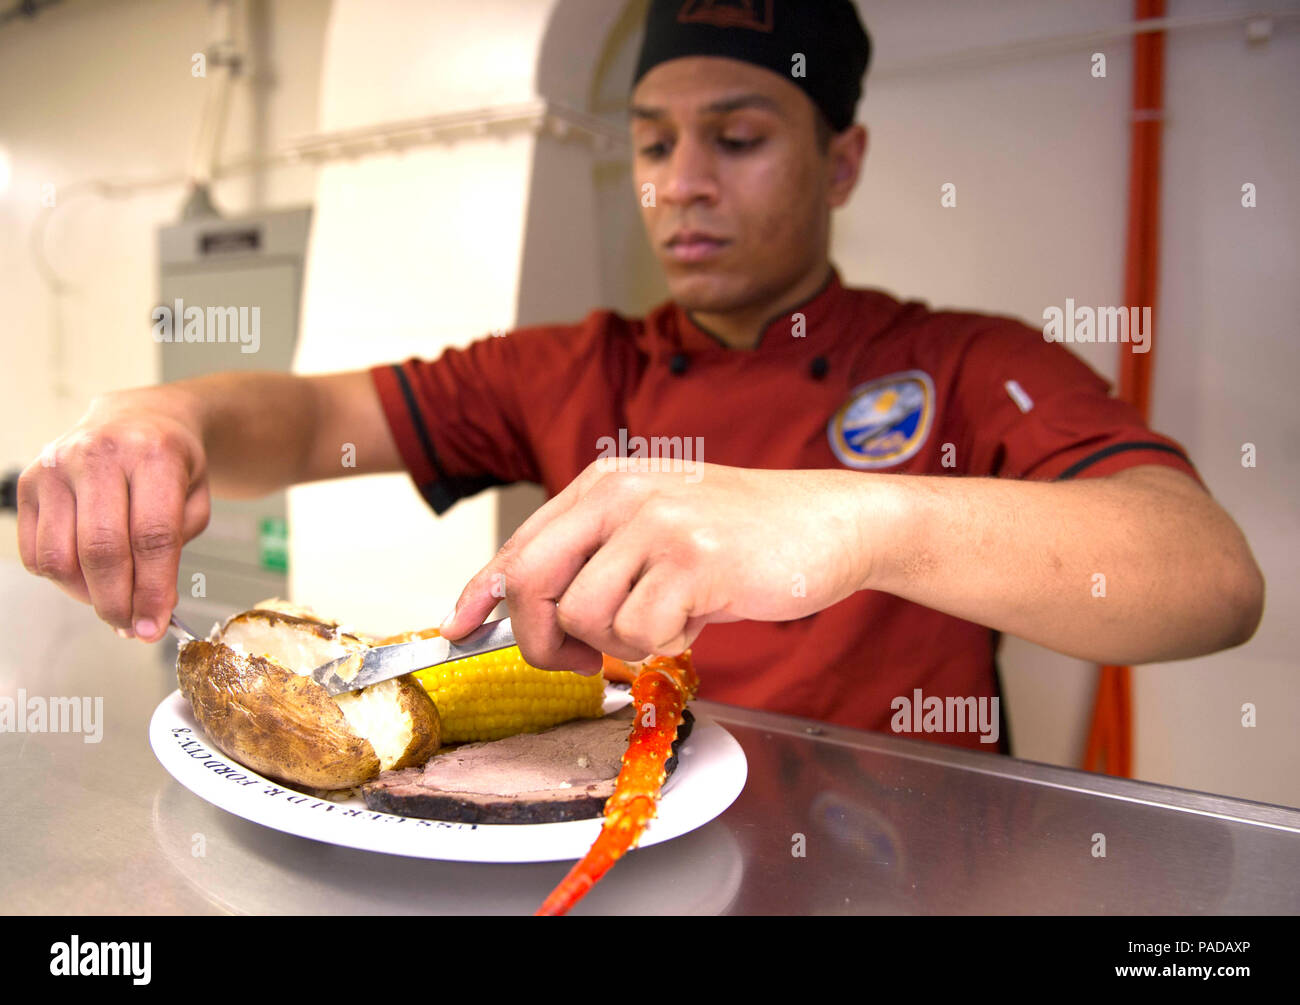 NEWPORT NEWS, Va. (Mar.18, 2016) --  Culinary Specialist Seaman Adrian Palmer, a native of Colombia, S.C, prepares a plate of food for Pre-Commissioning Unit Gerald R. Ford (CVN 78) Sailors taking part in a March birthday meal celebration on the ship's mess decks.  Ford is scheduled for commissioning in 2016.  (U.S. Navy photo by Mass Communication Specialist 1st Class Patrick Grieco/Released) (This image was altered for security purpose by blurring out security badges) Stock Photo